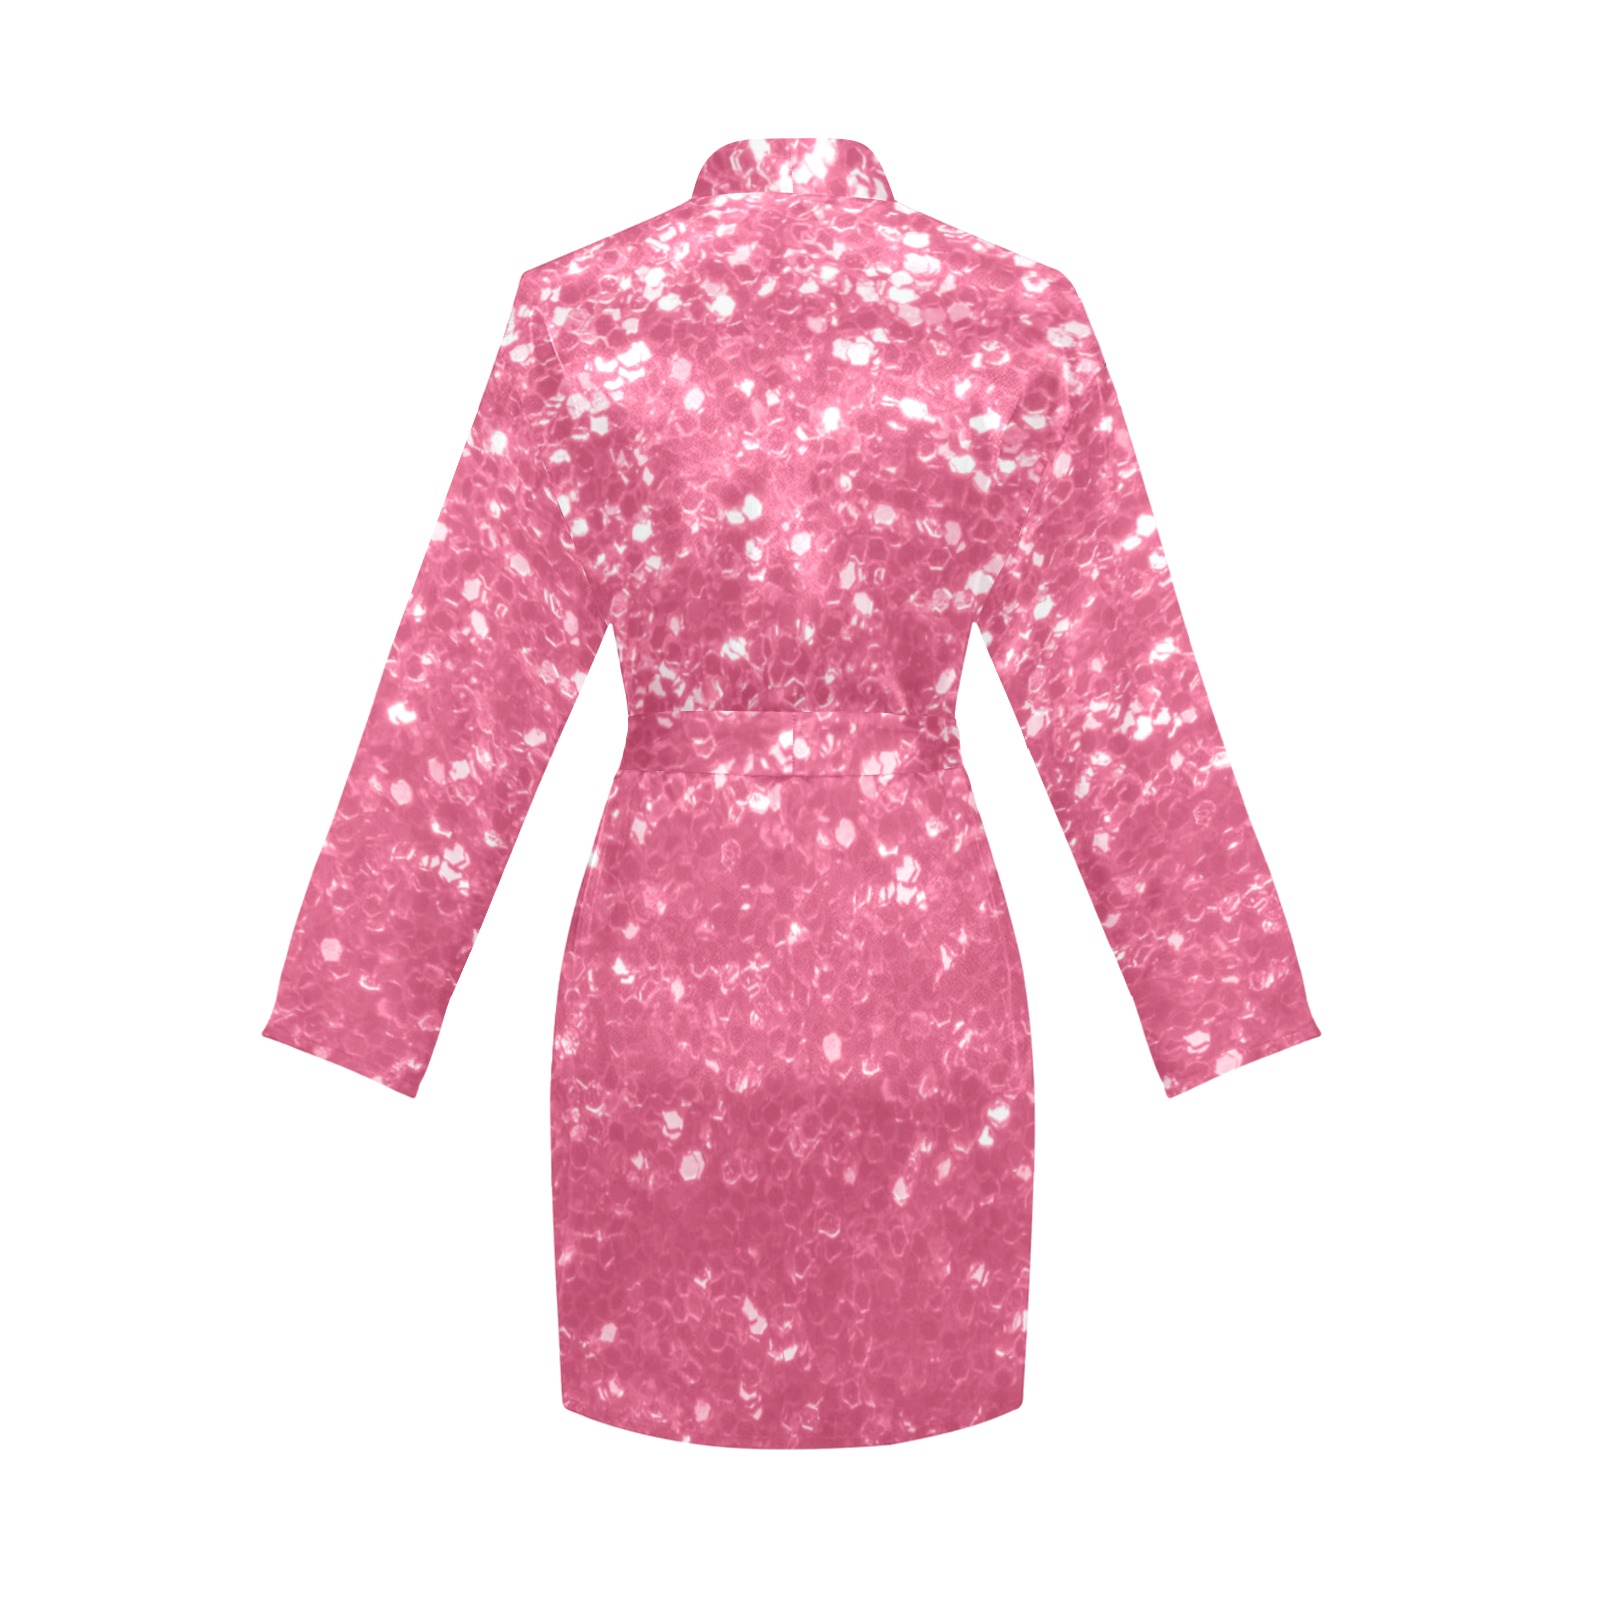 Magenta light pink red faux sparkles glitter Women's Long Sleeve Belted Night Robe